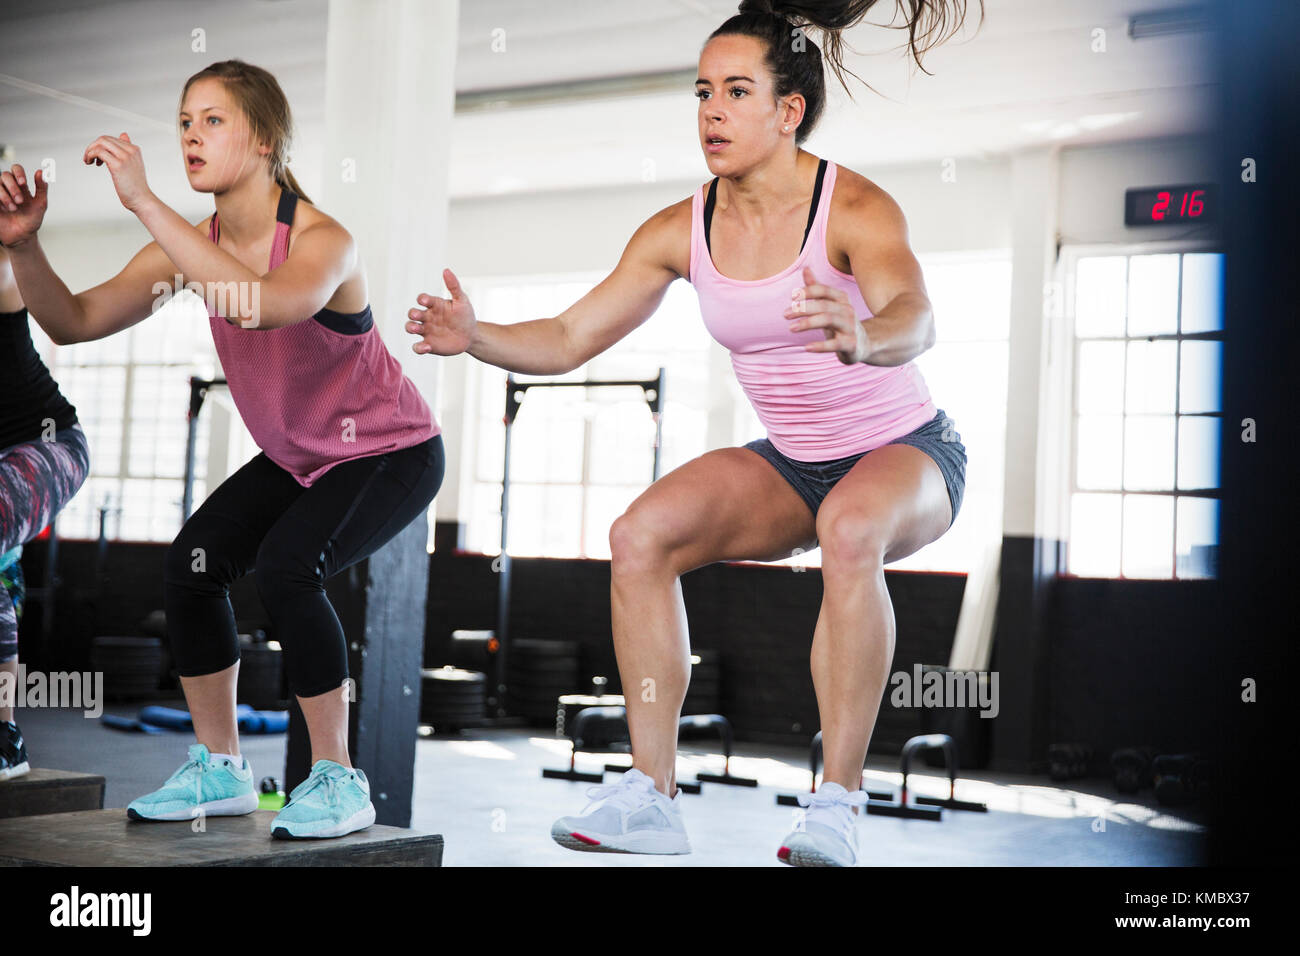 Determined young women doing jump squats in exercise class Stock Photo